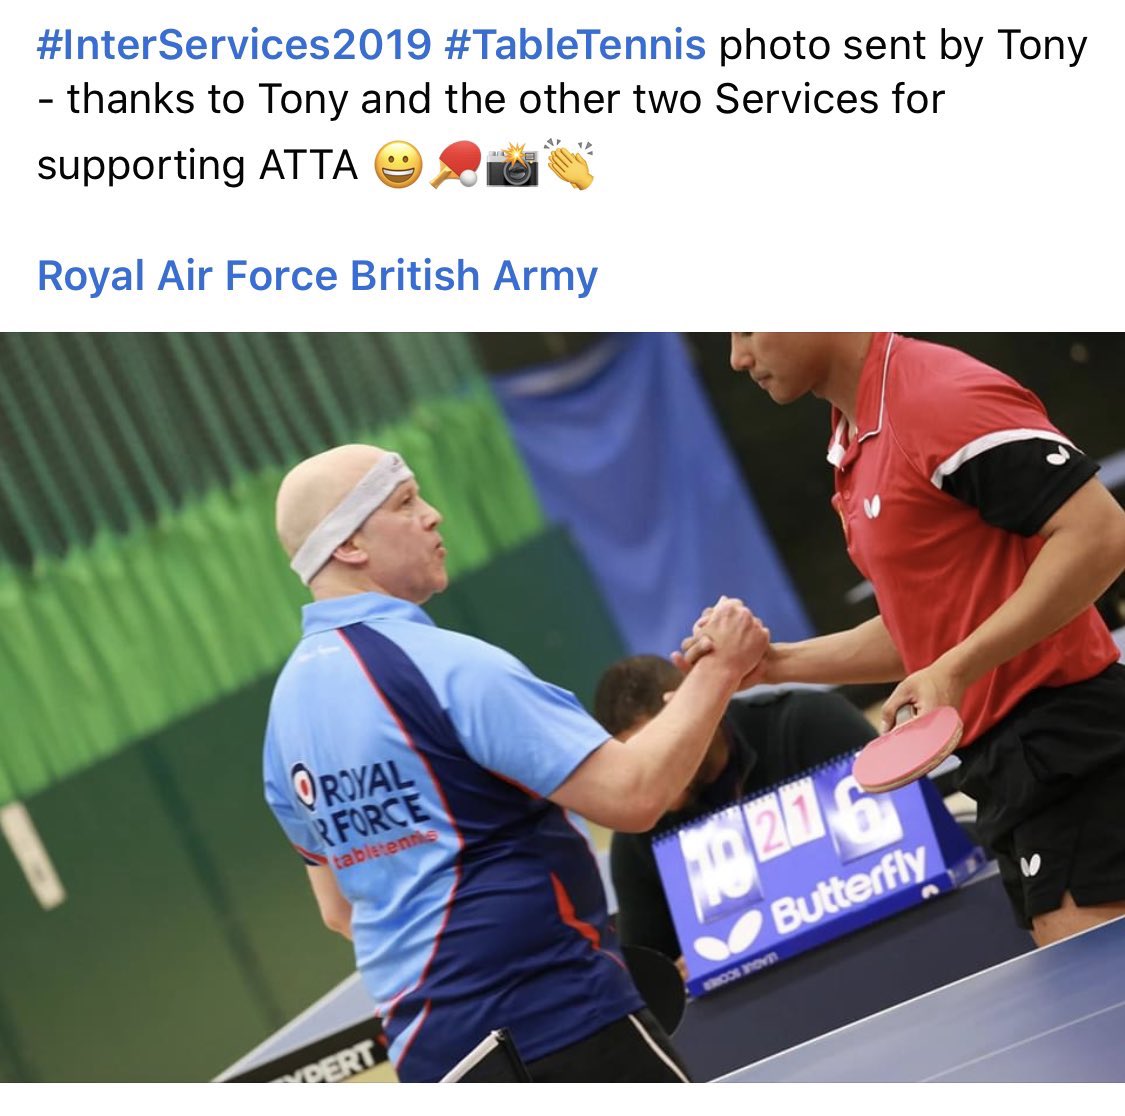 FLASHBACK; INTER-SERVICES TT CHAMPS 2019:

Well done #TeamATTA - a special mention goes to LCpl Kiran Tamang high praise indeed - congratulations - @24Commando @Proud_Sappers 👏

#InterServices2019 #TableTennis